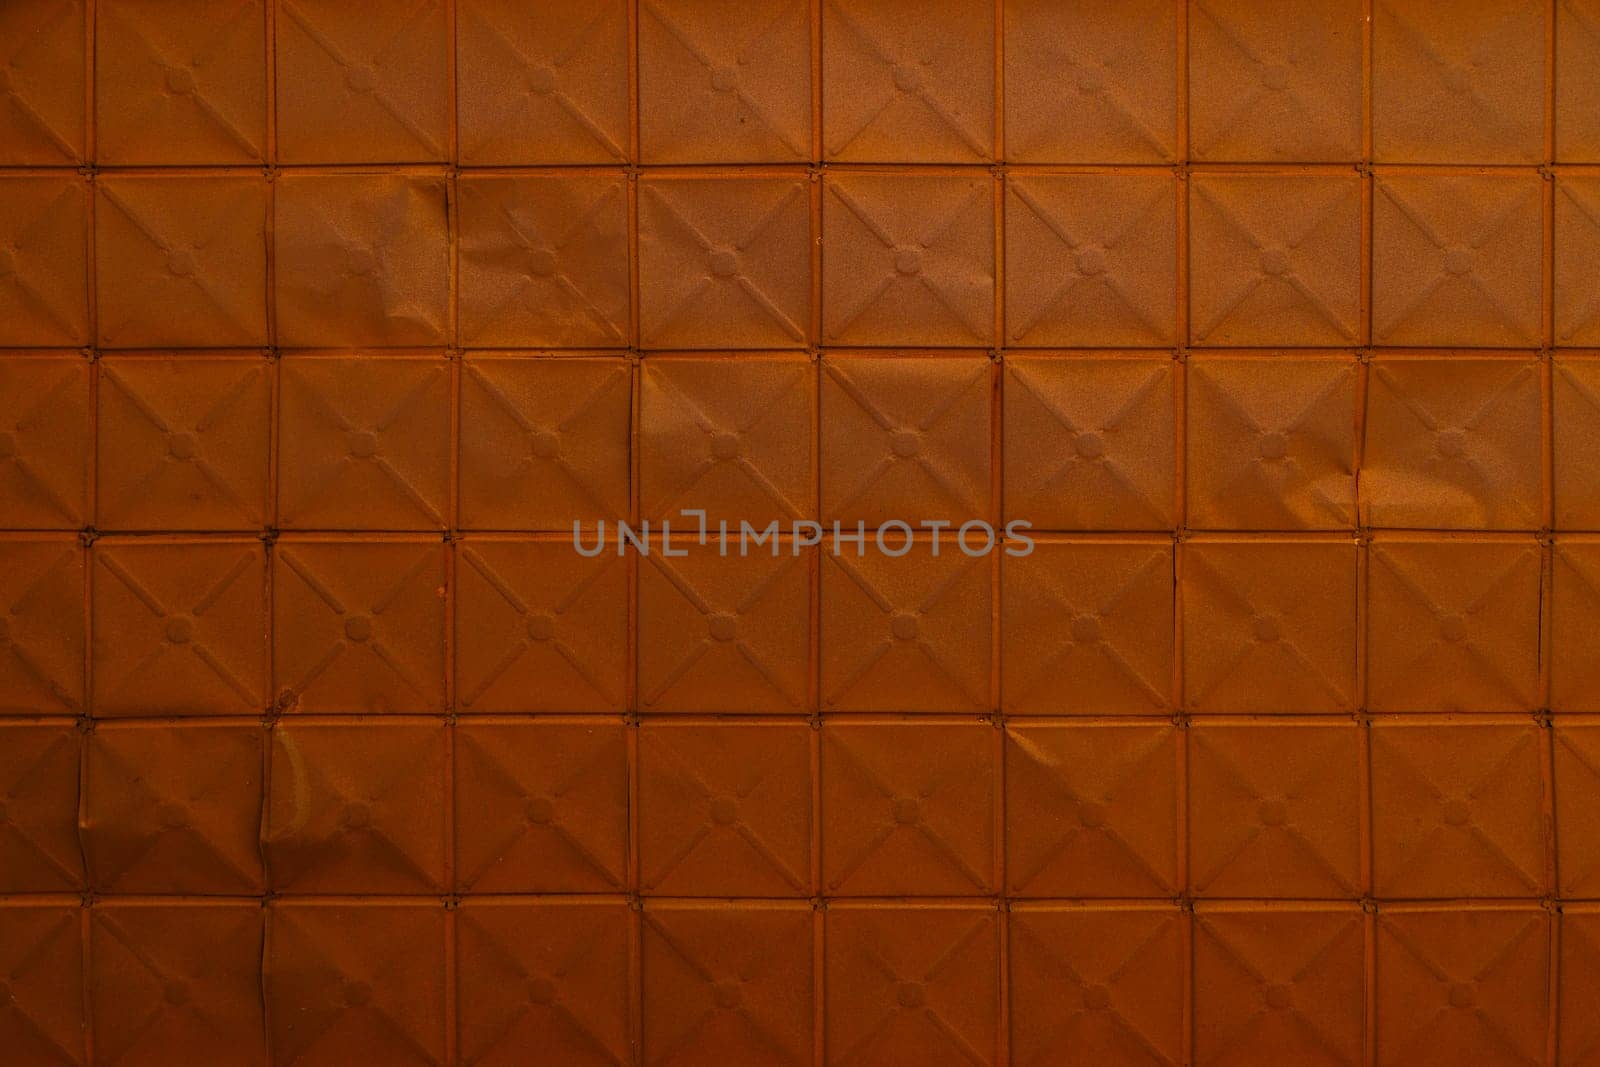 full-frame background and texture of square stamped sheet metal tiles with diagonal ribs by z1b